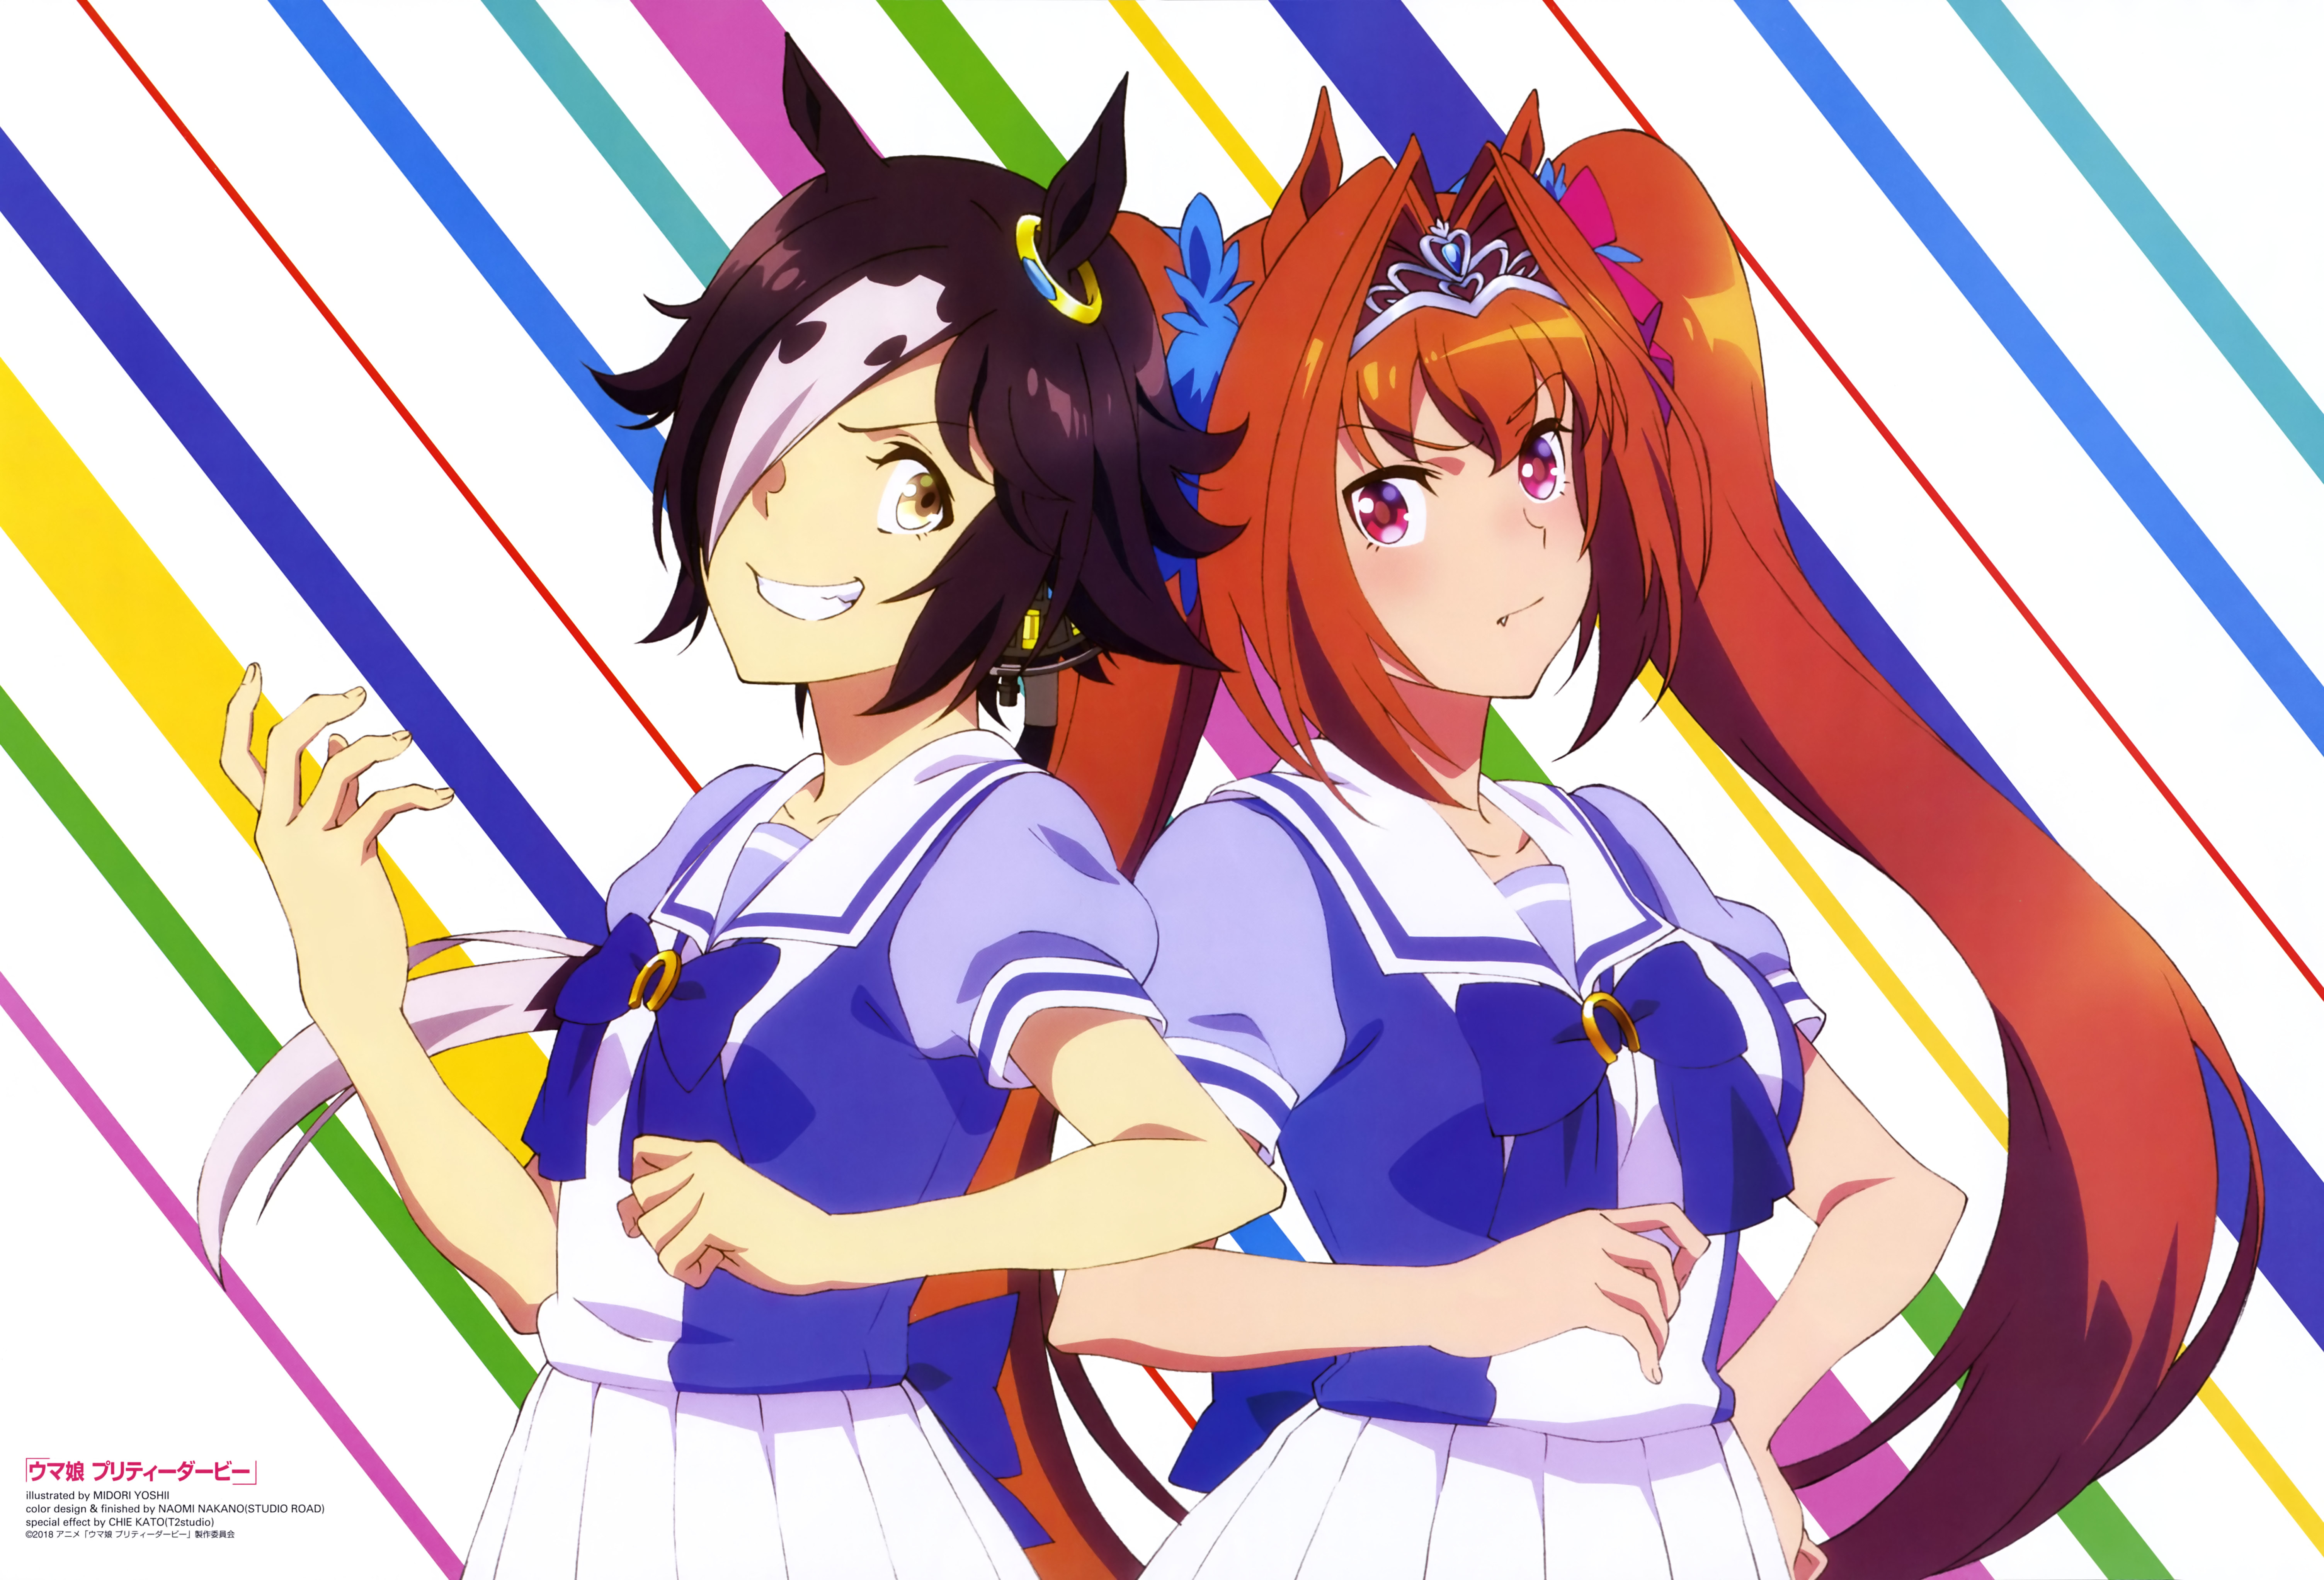 Anime Uma Musume: Pretty Derby HD Wallpaper | Background Image